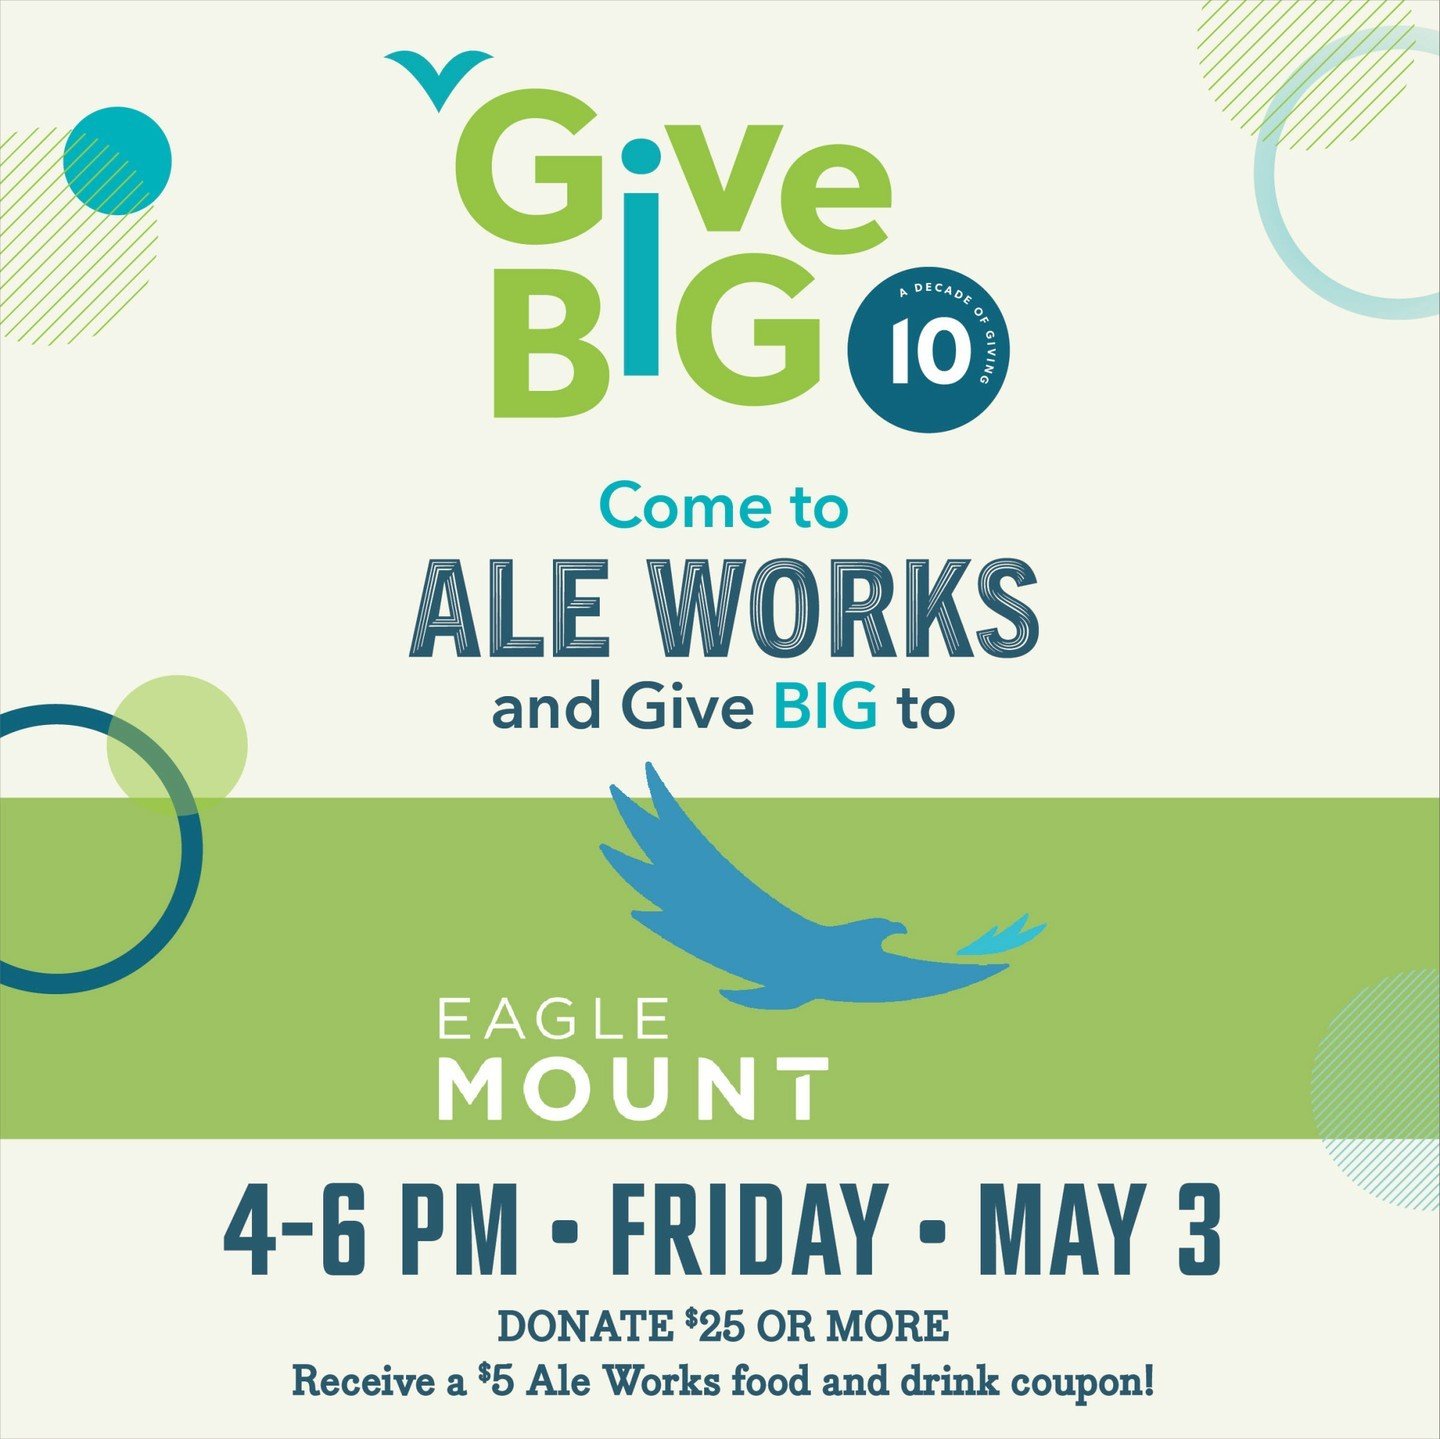 Eagle Mount will be hosting their donor lounge with us from 4-6 as funds are raised for Give Big!

 They will be handing out incentives for donors, so come on down and show your support for this amazing local organization!!

#montanafood #bozemanfood